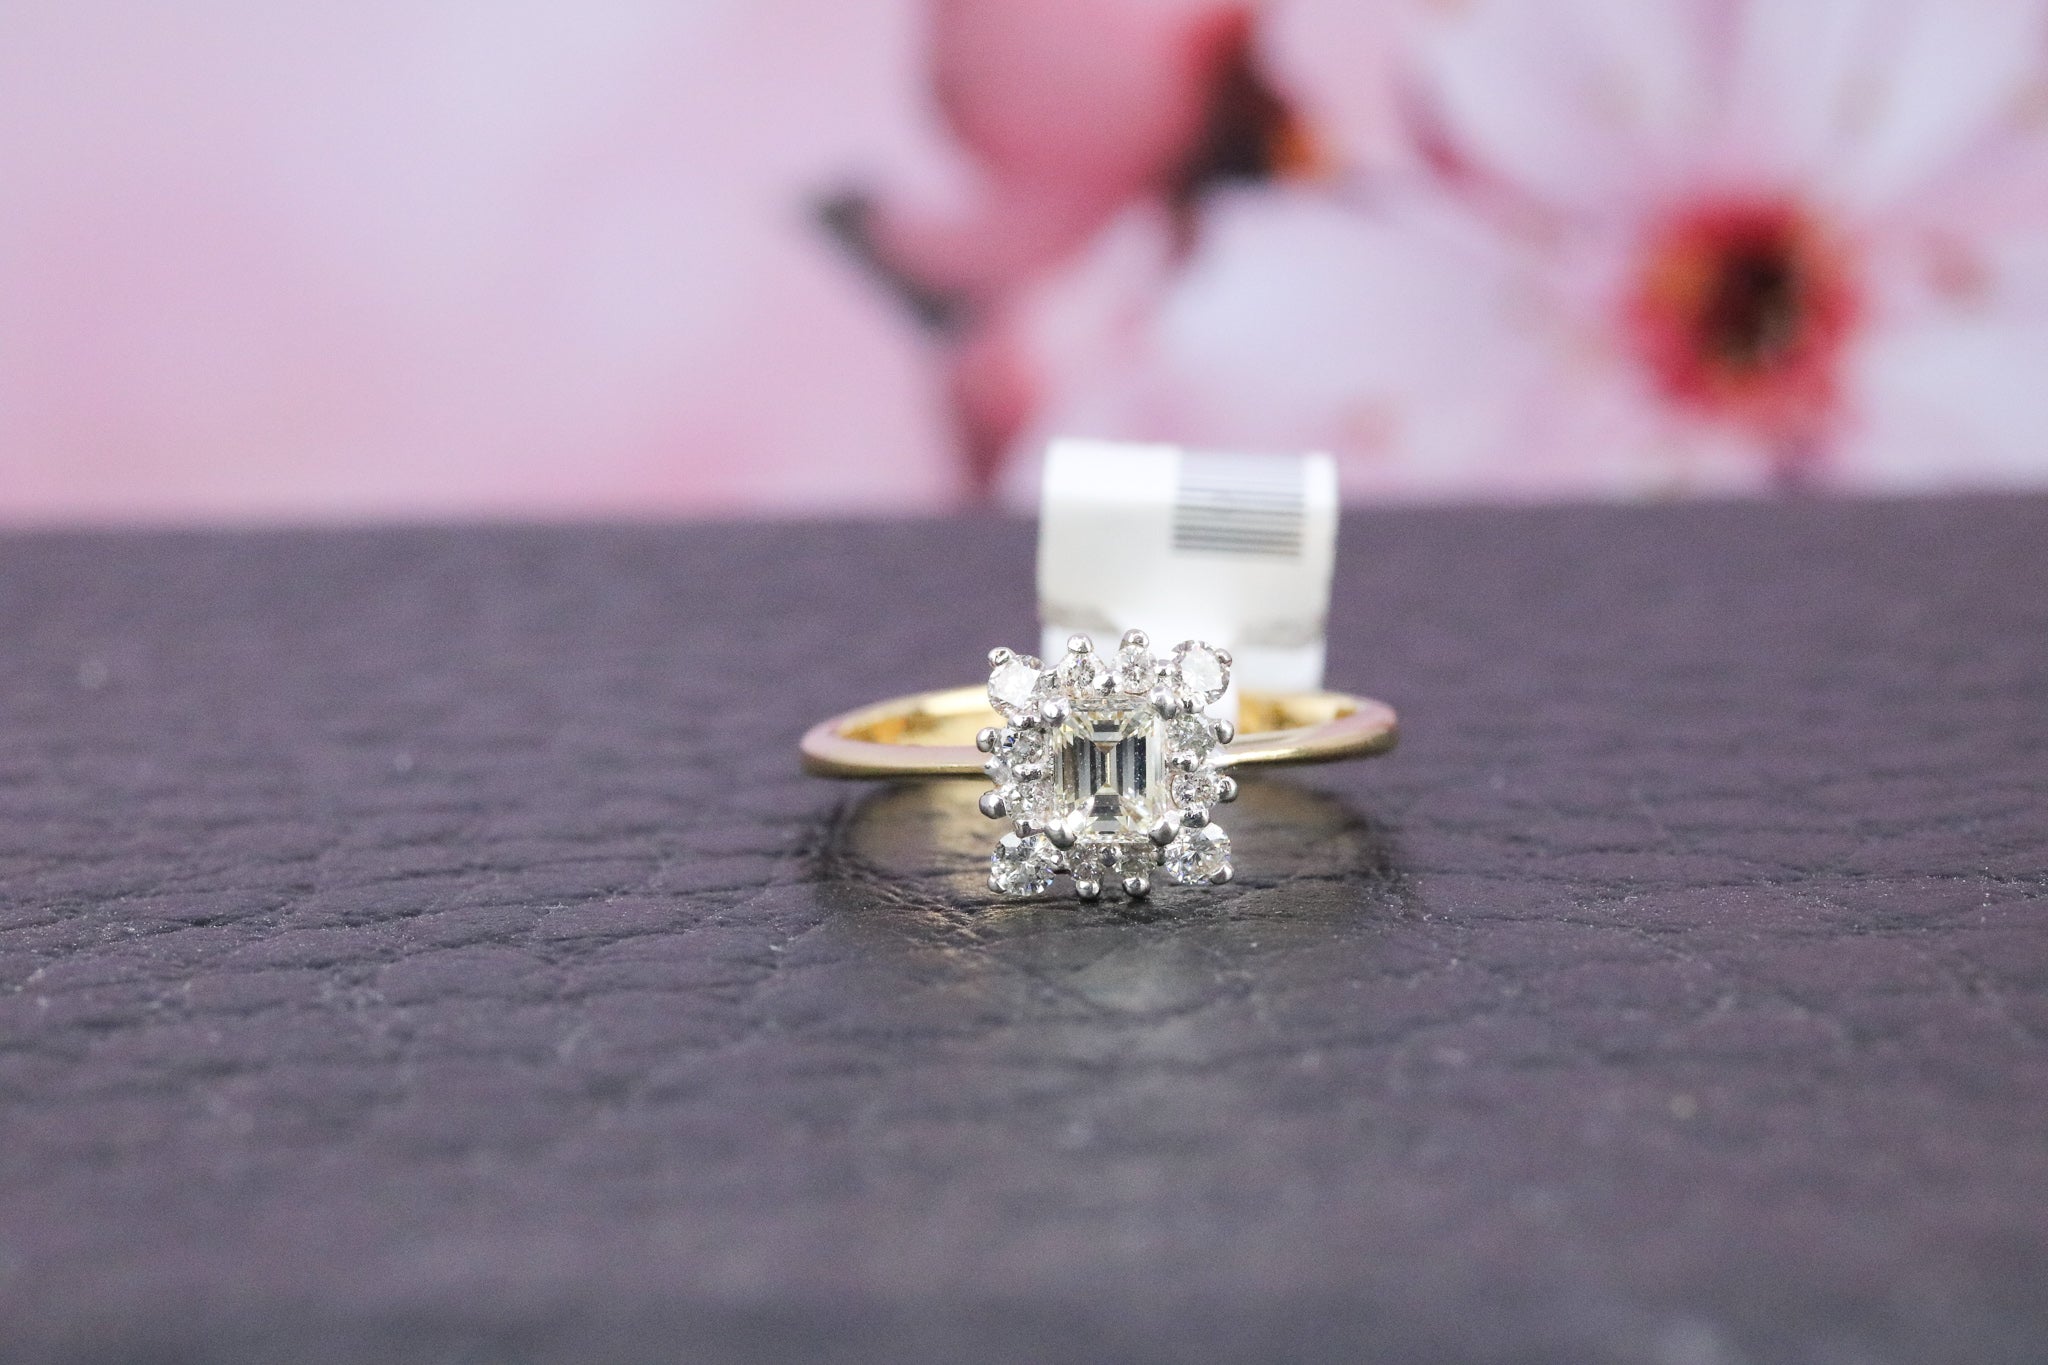 18ct Yellow Gold Diamond Ring - CO1150 - Hallmark Jewellers Formby & The Jewellers Bench Widnes